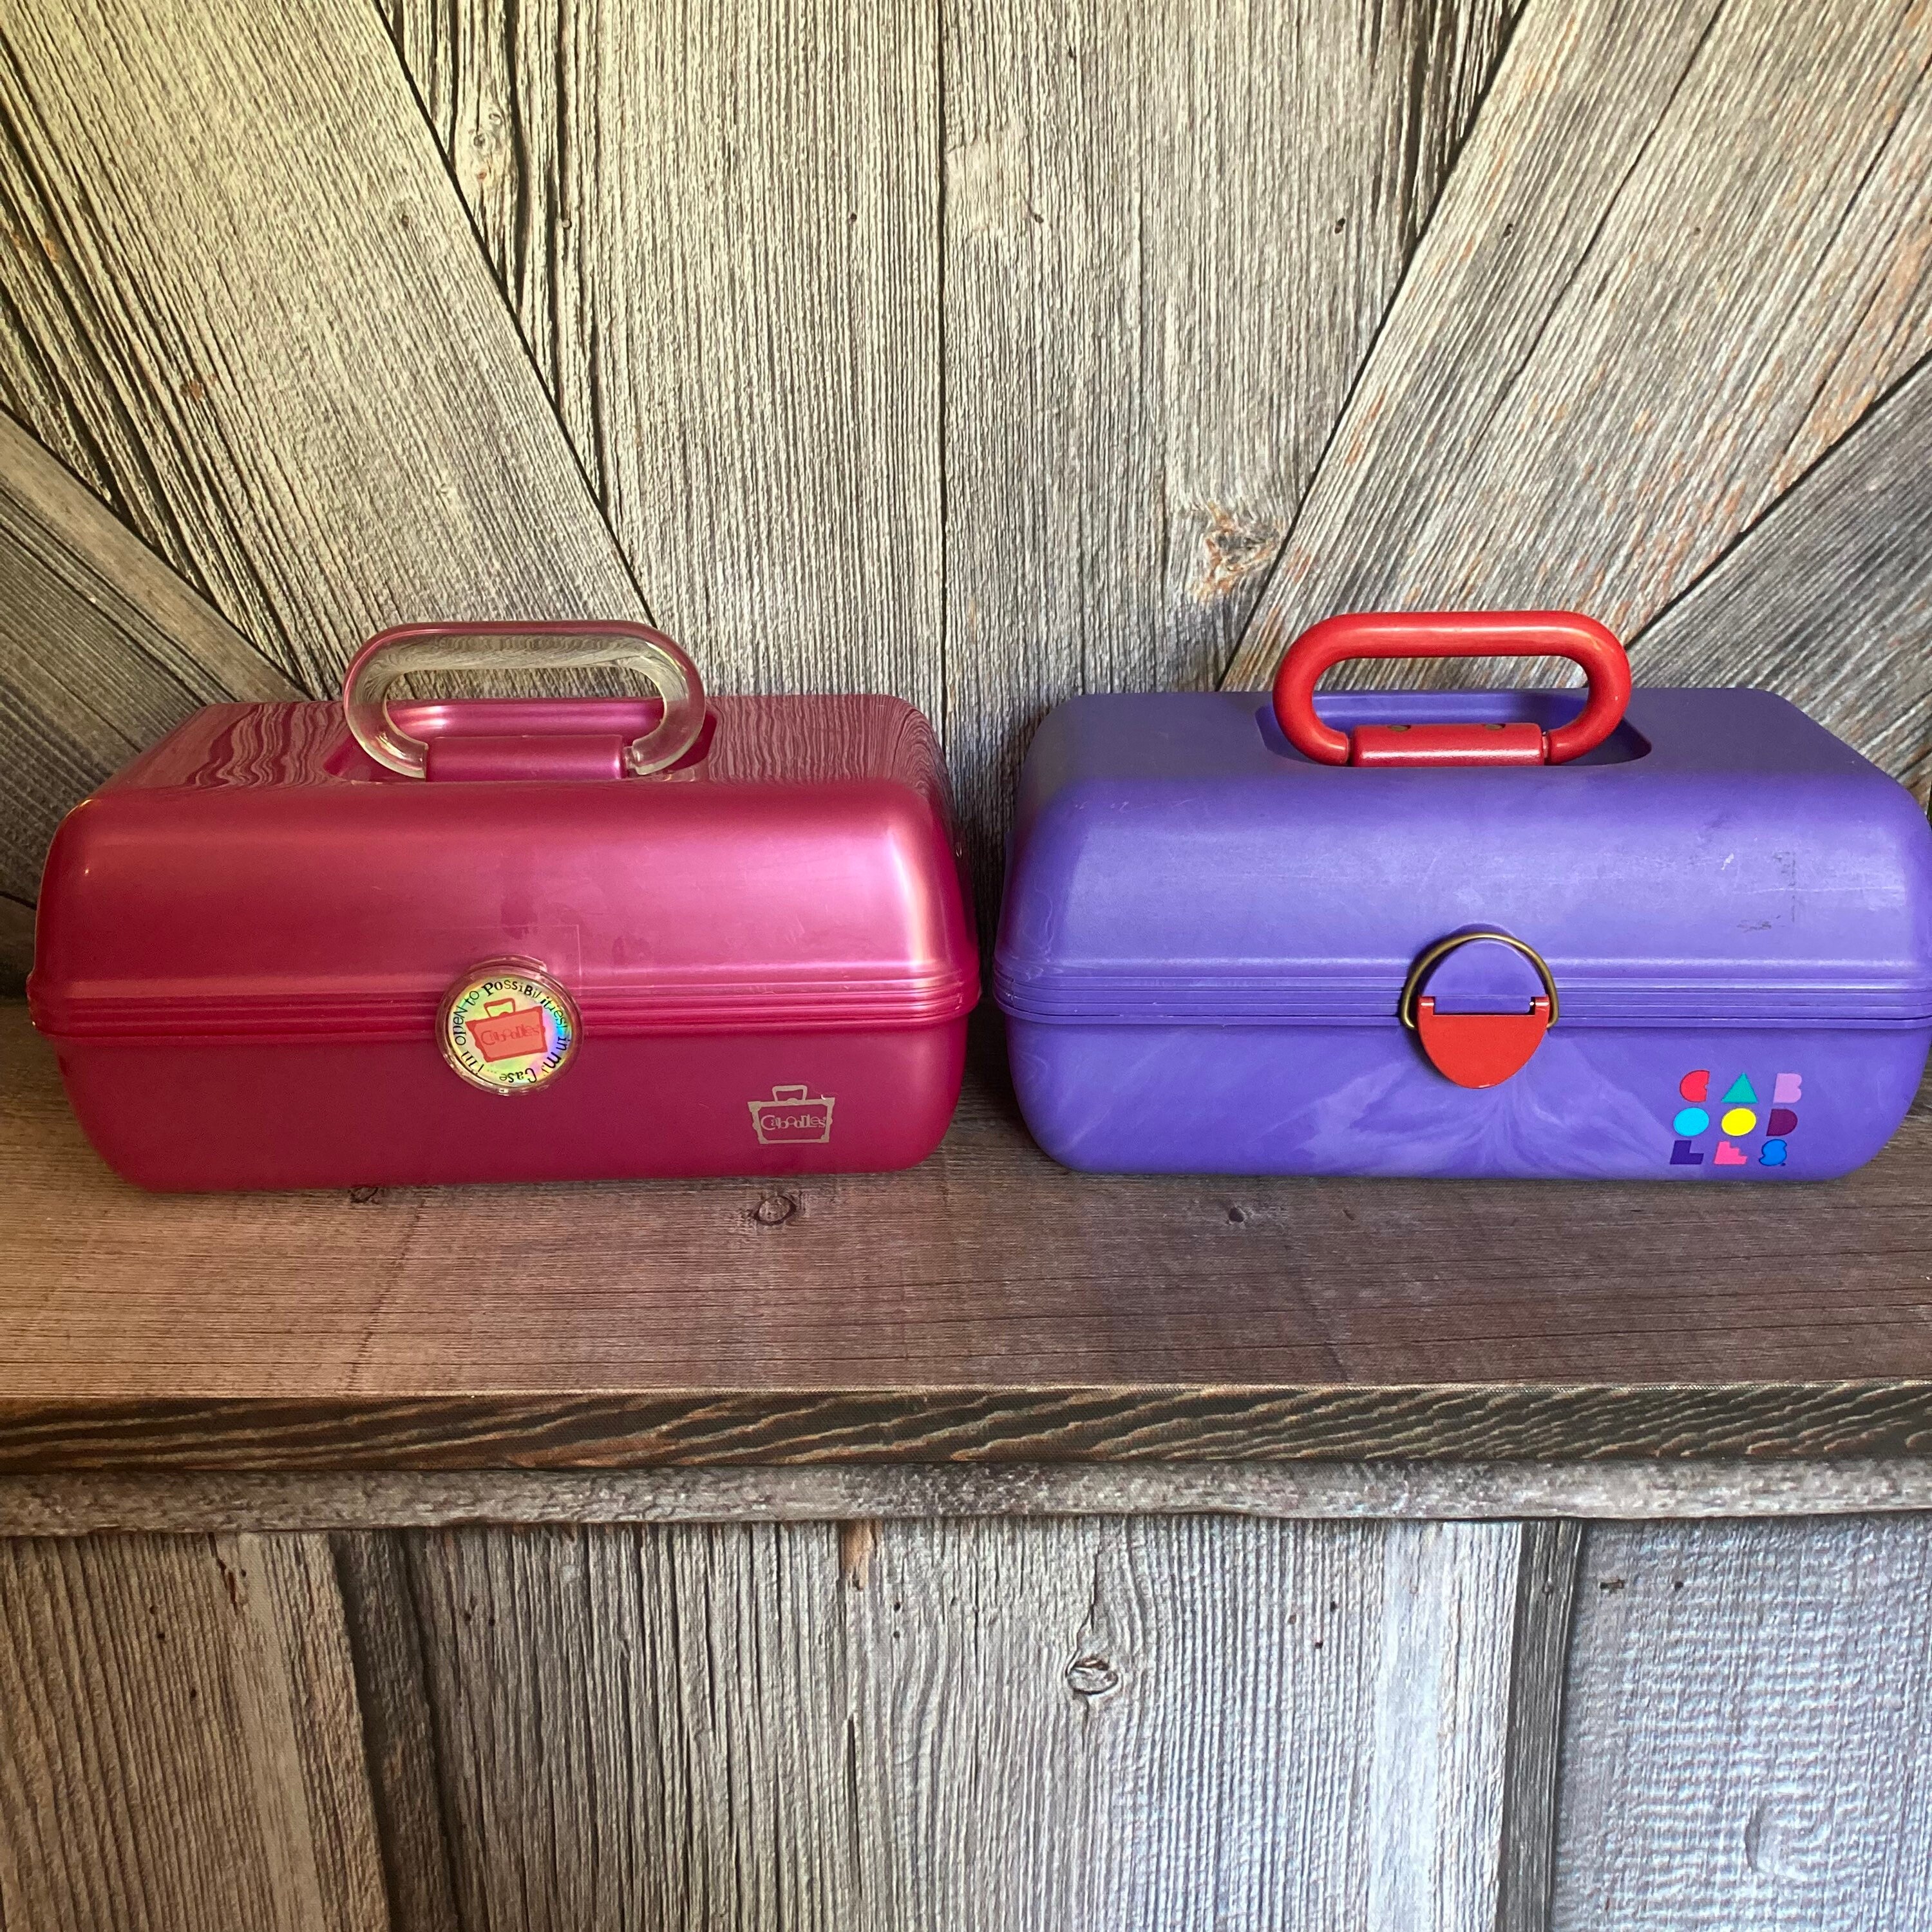 Caboodles: The Ultimate '90s Makeup (and Random Stuff) Organizer